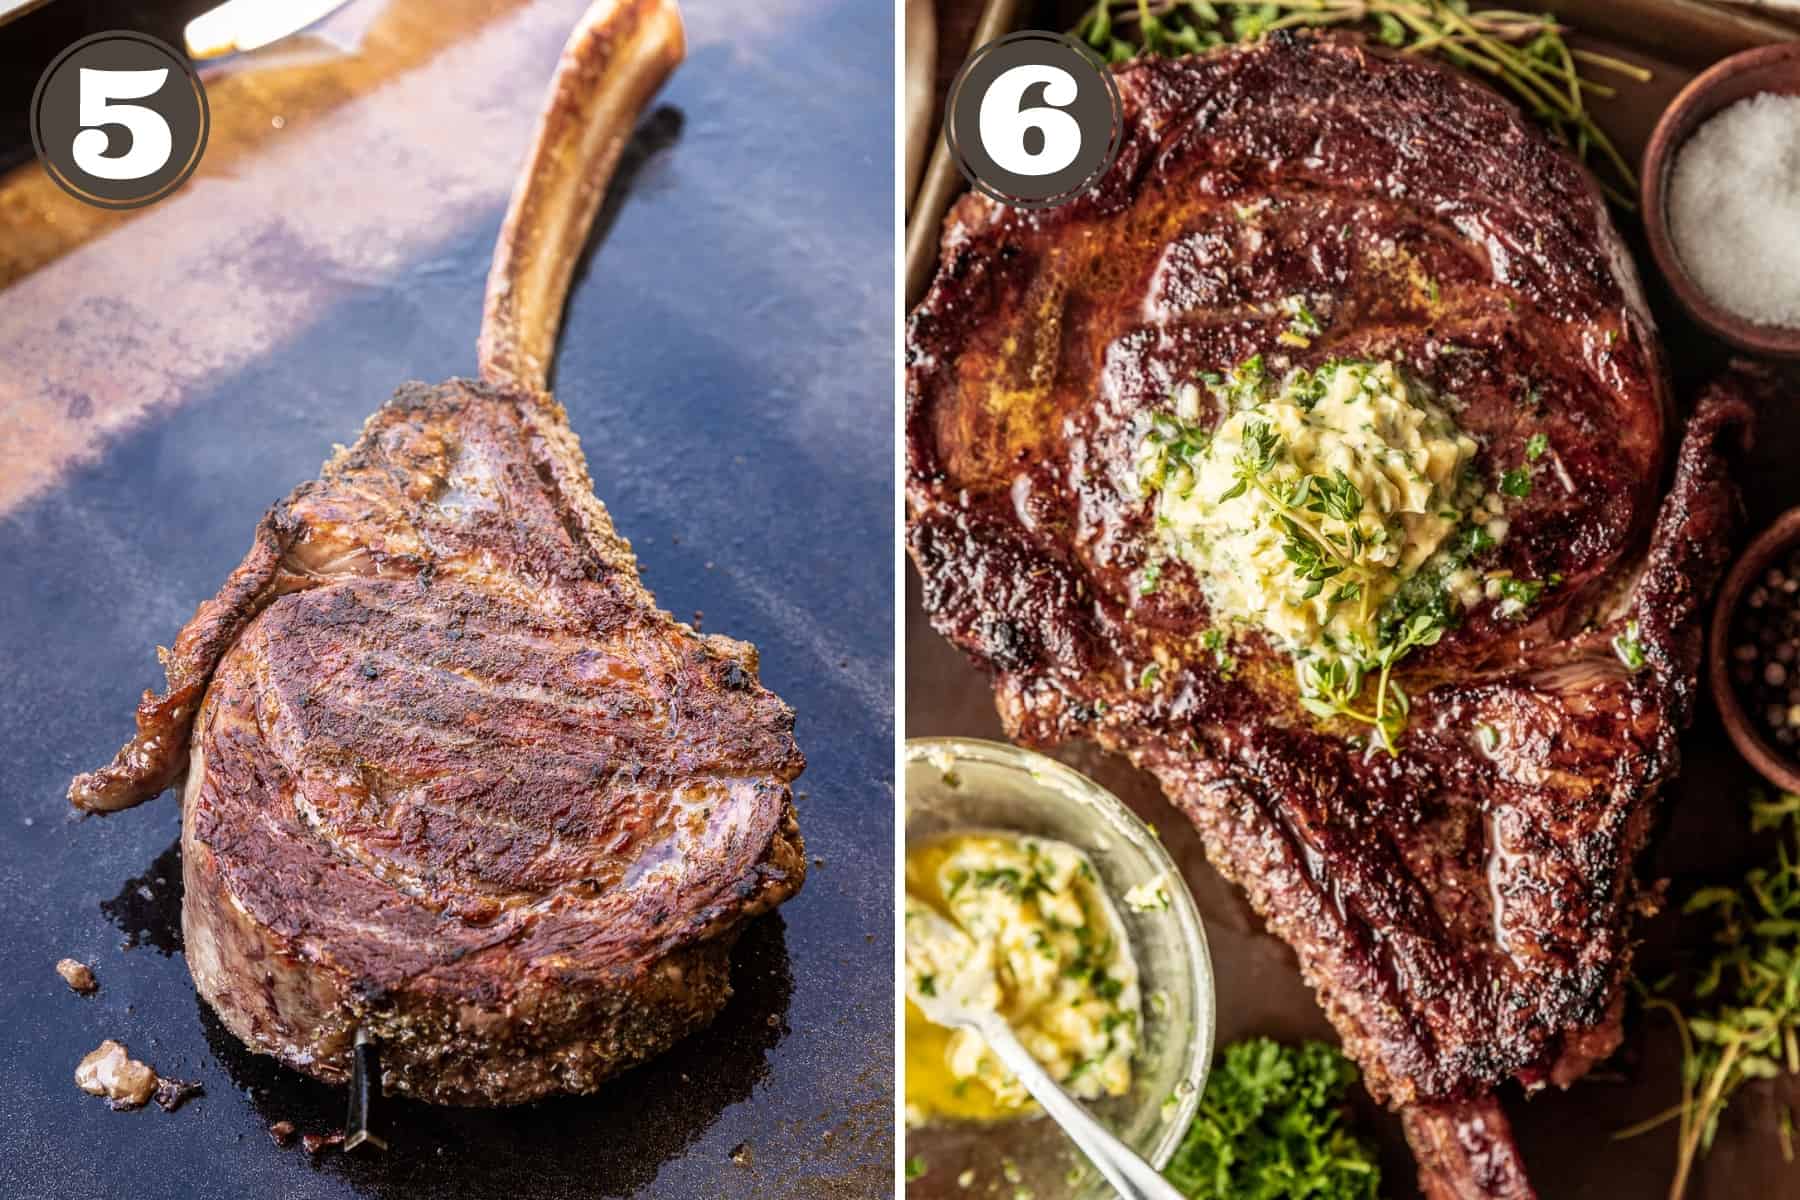 Side by side photos showing a tomohawk steak being reverse seared on a griddle and being served with compound butter.